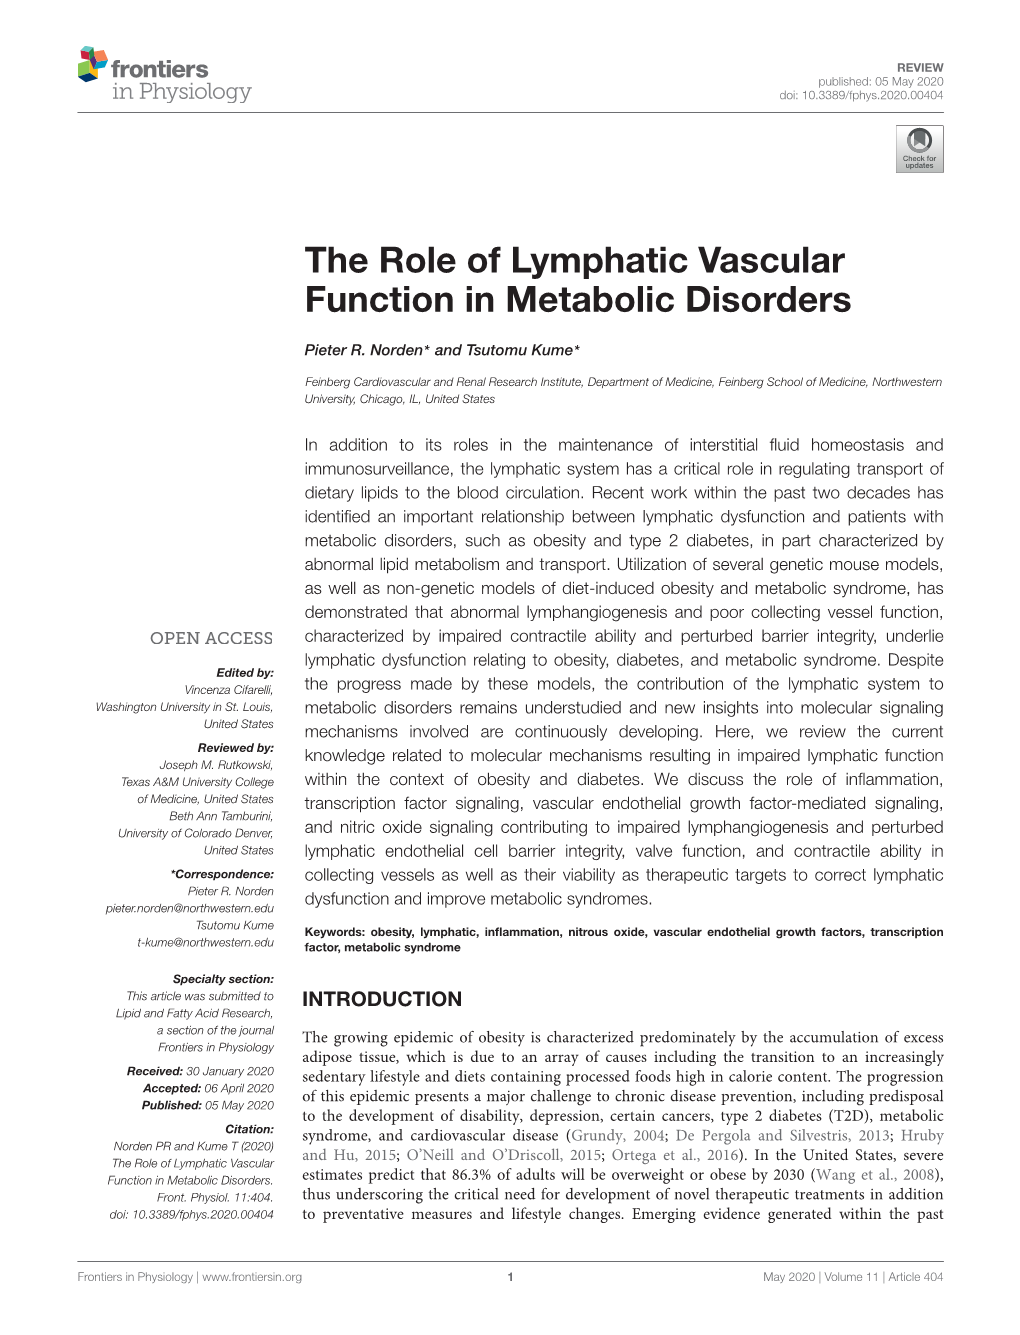 The Role of Lymphatic Vascular Function in Metabolic Disorders